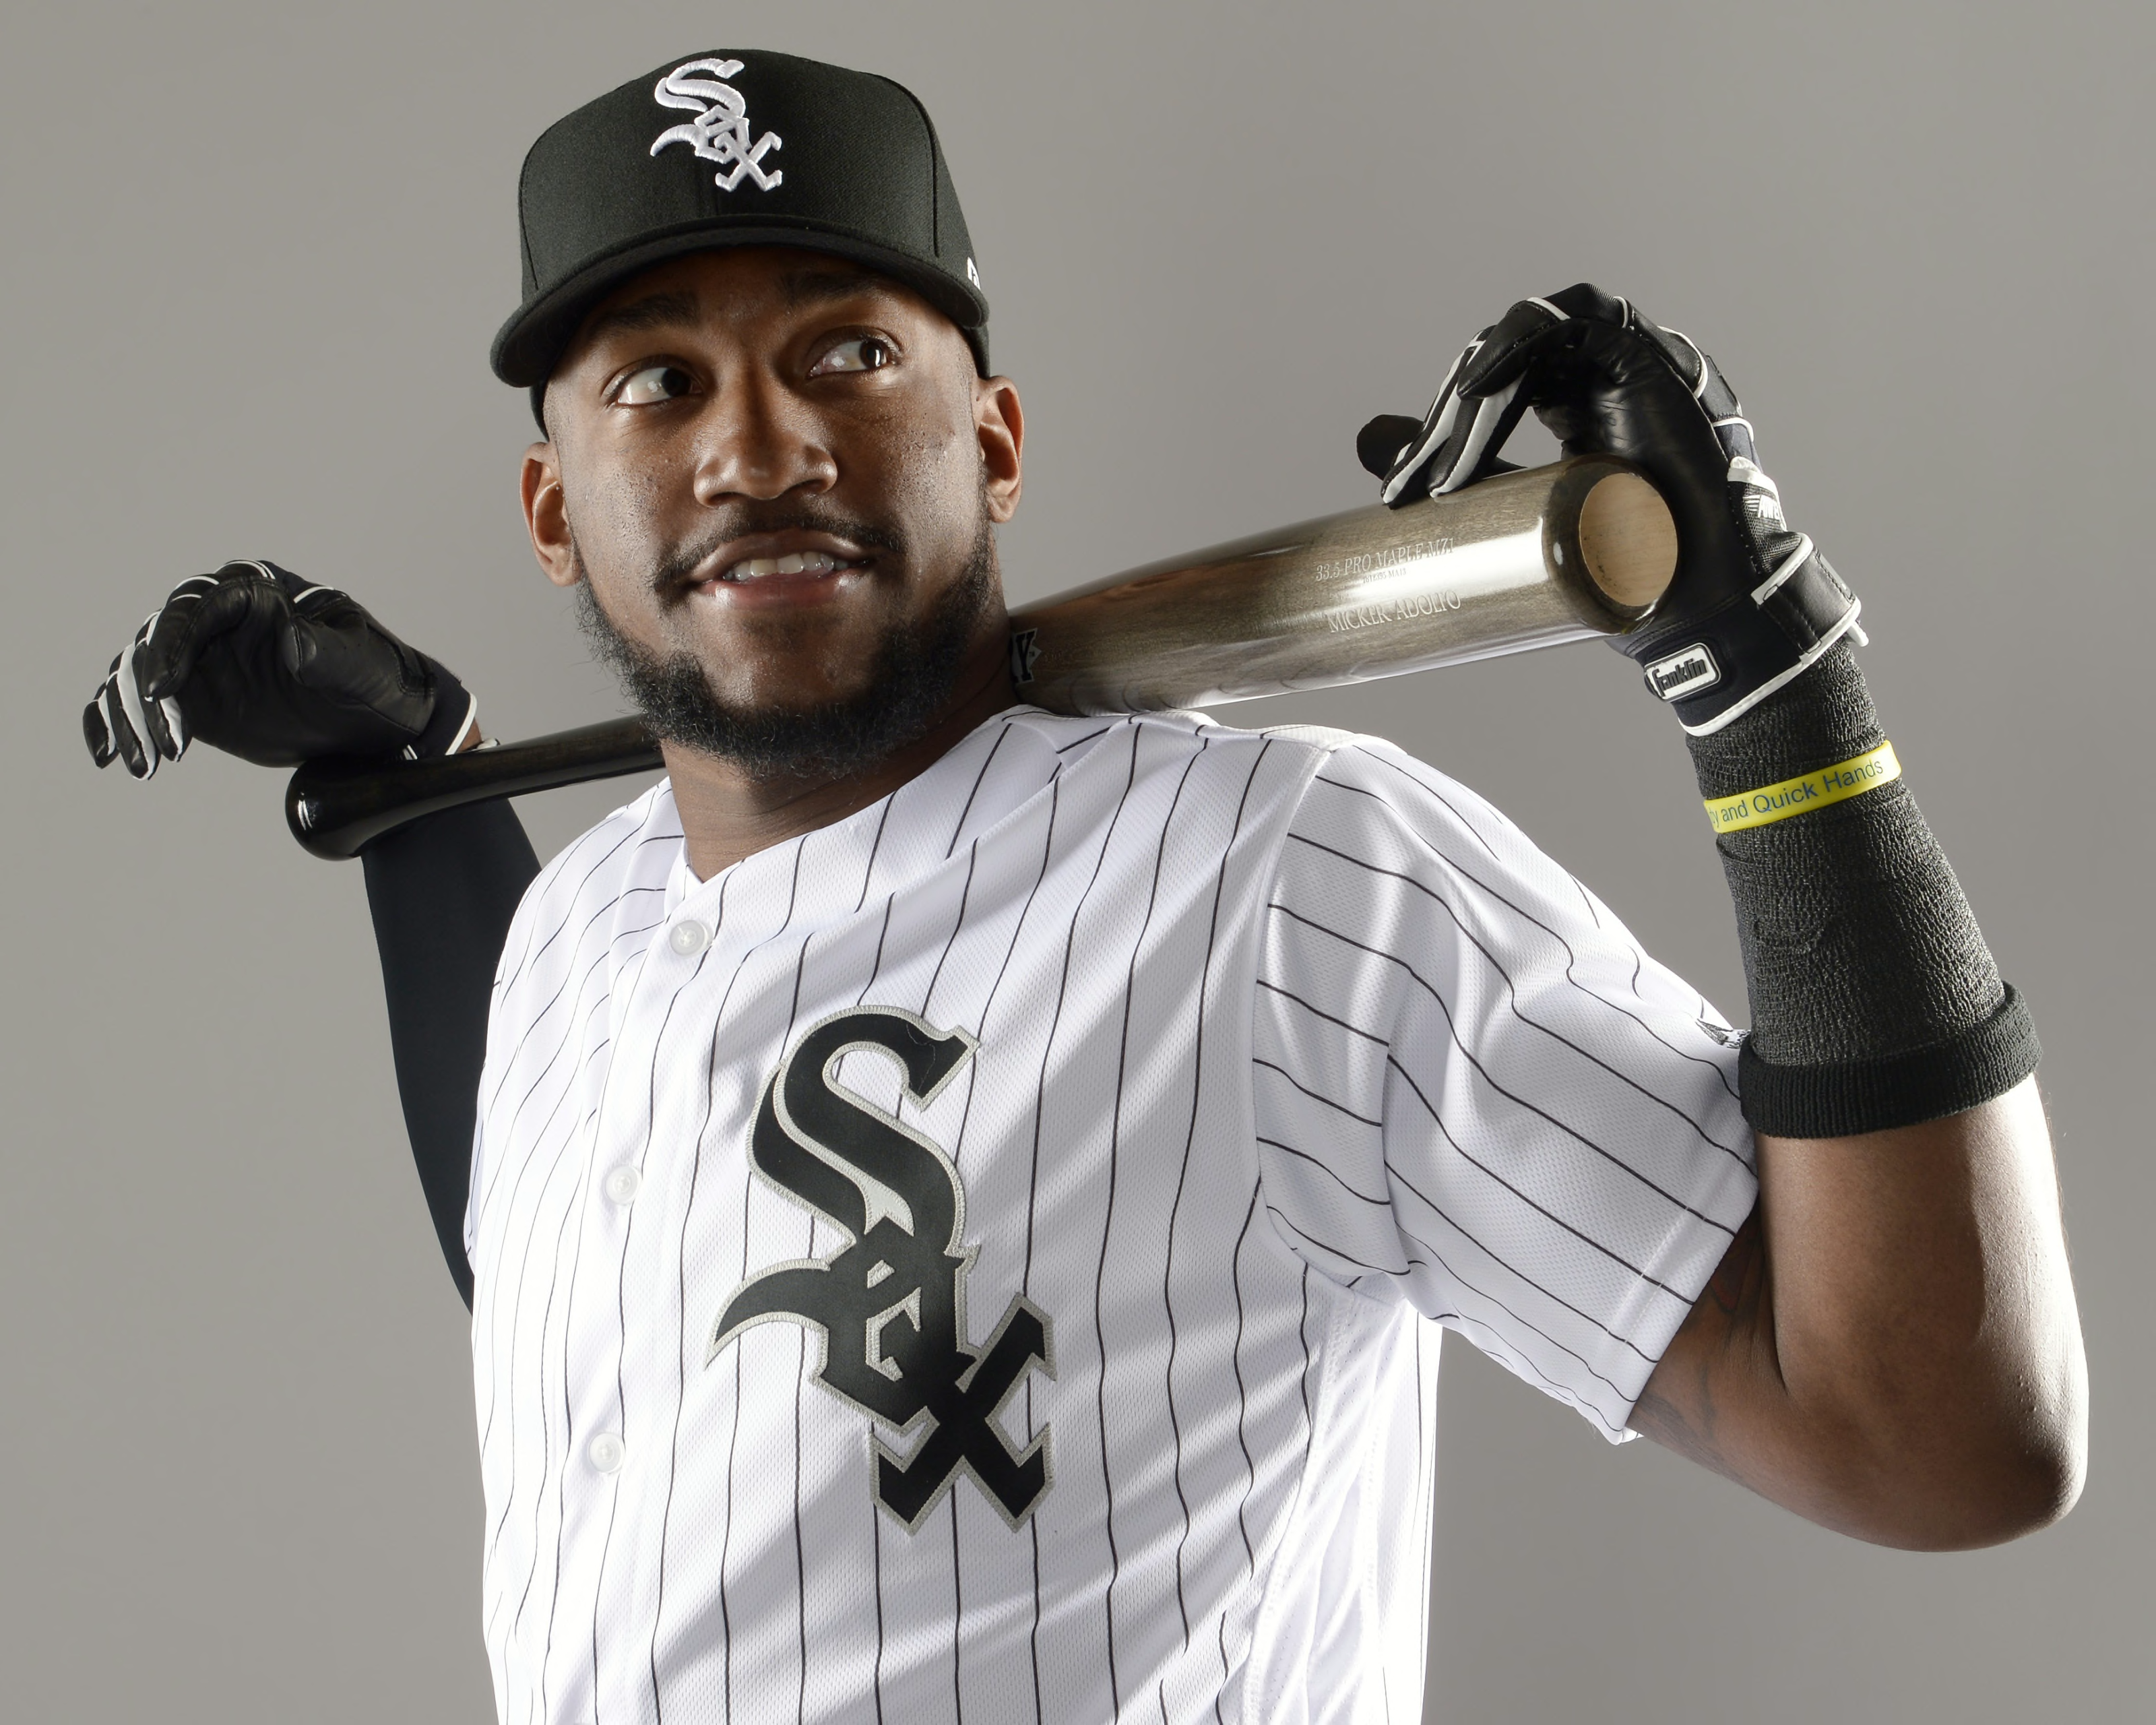 Chicago White Sox 5 Milwaukee Brewers 2 Offense delivers early and often   South Side Sox